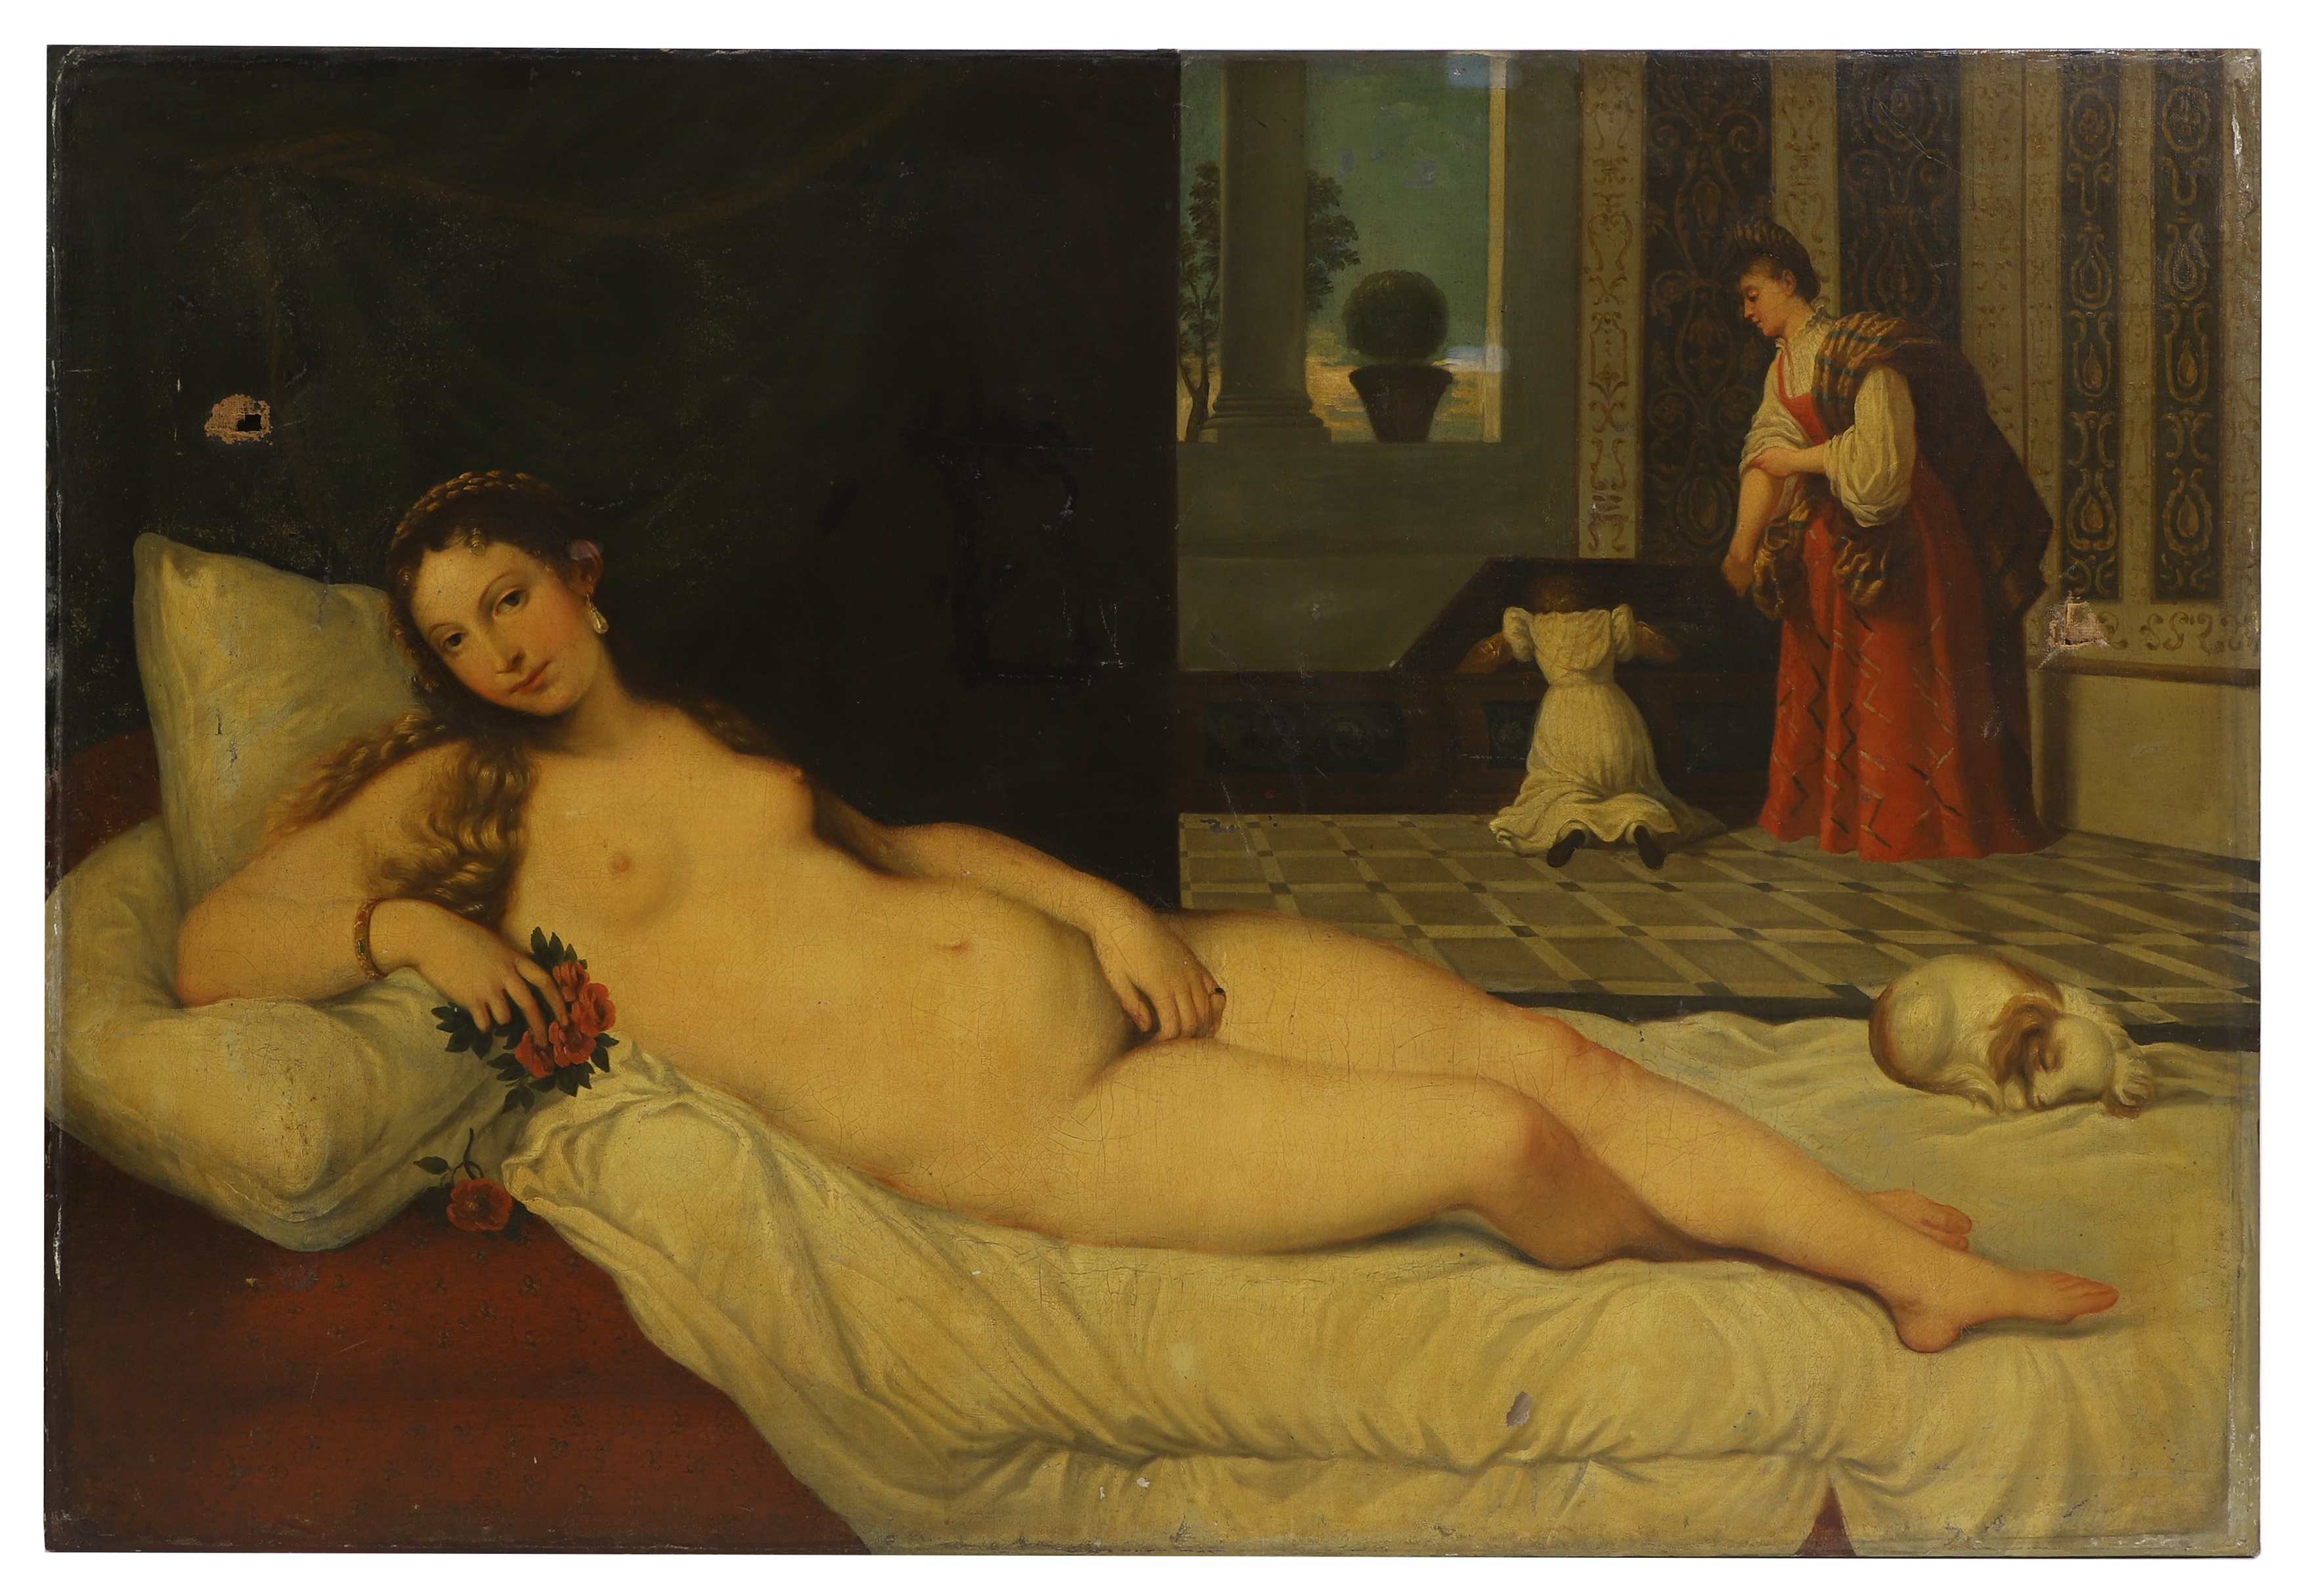 After Titian The Venus of Urbino oil on canvas 118 x 170cm, unframed (£3,000-5,000)